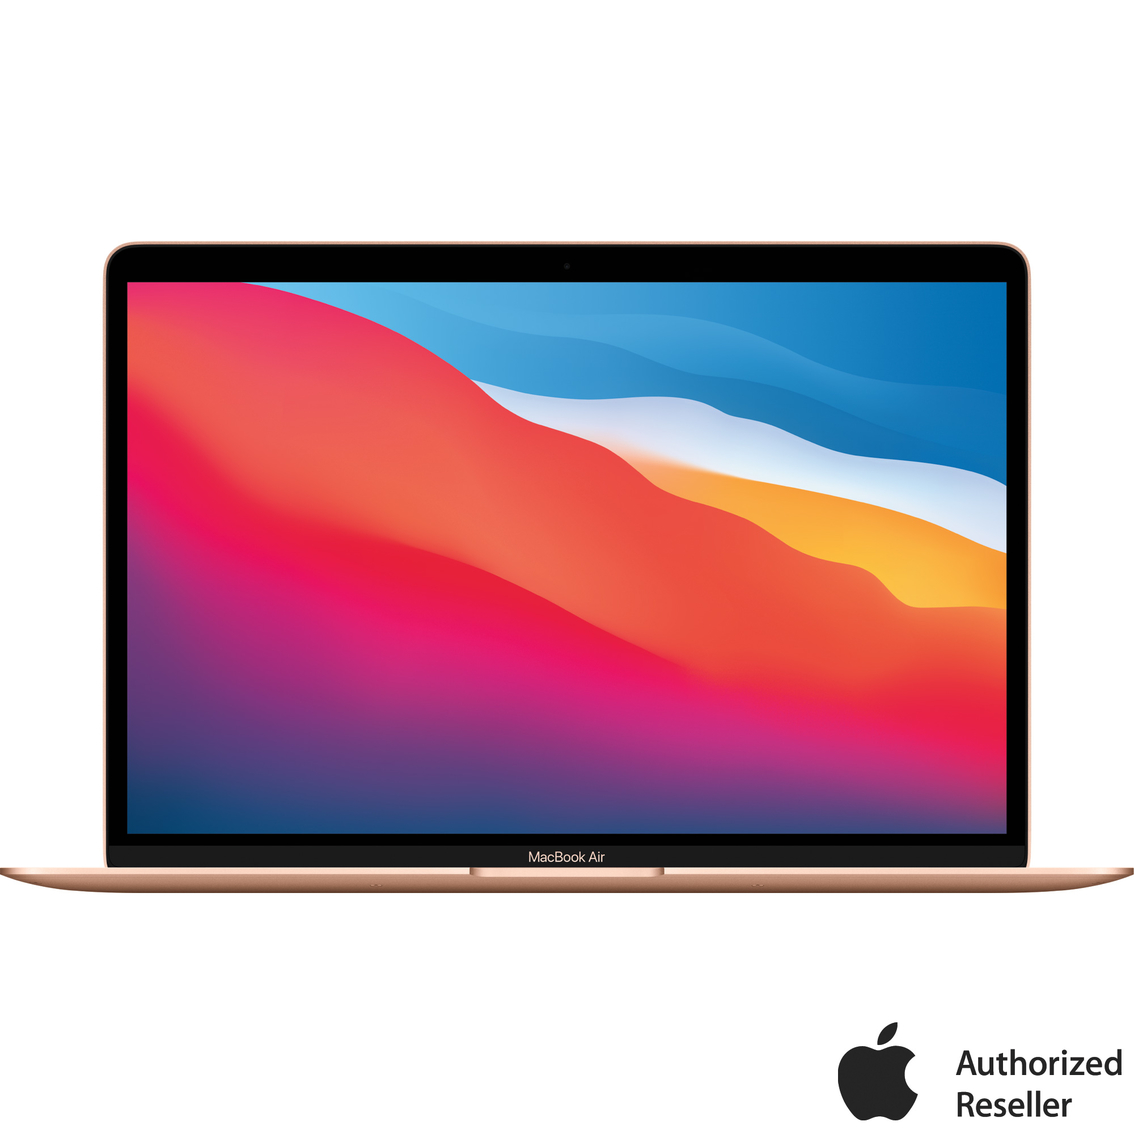 Apple MacBook Air 13 in. with M1 Chip 8-Core 8GB RAM 256GB SSD (Late 2020) - No Tax at AAFES $749